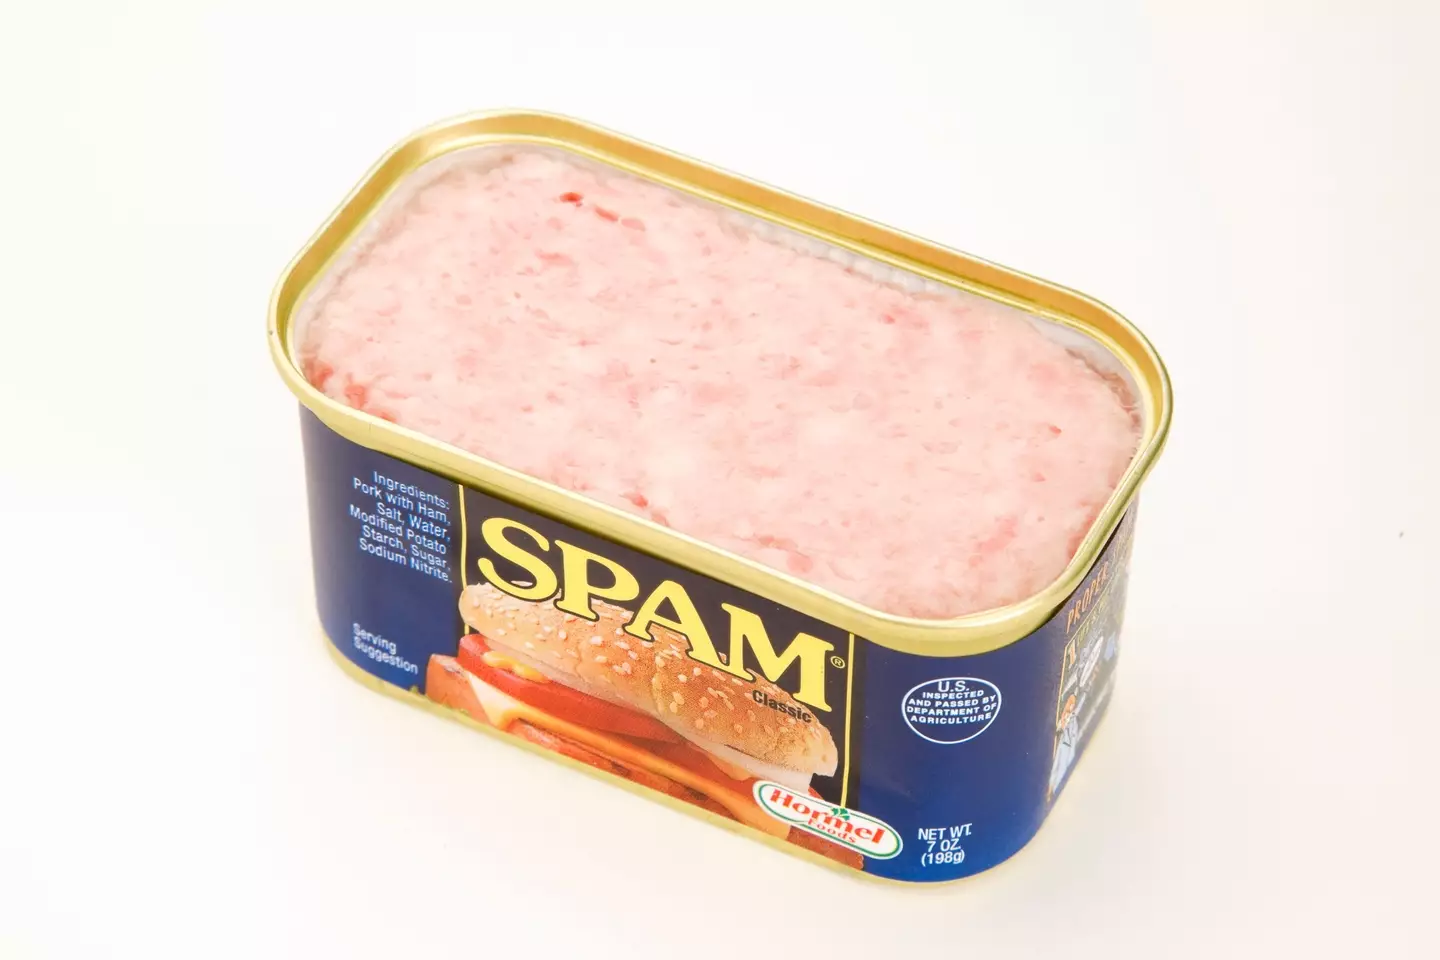 Spam was one of those packaged in the lunch box.